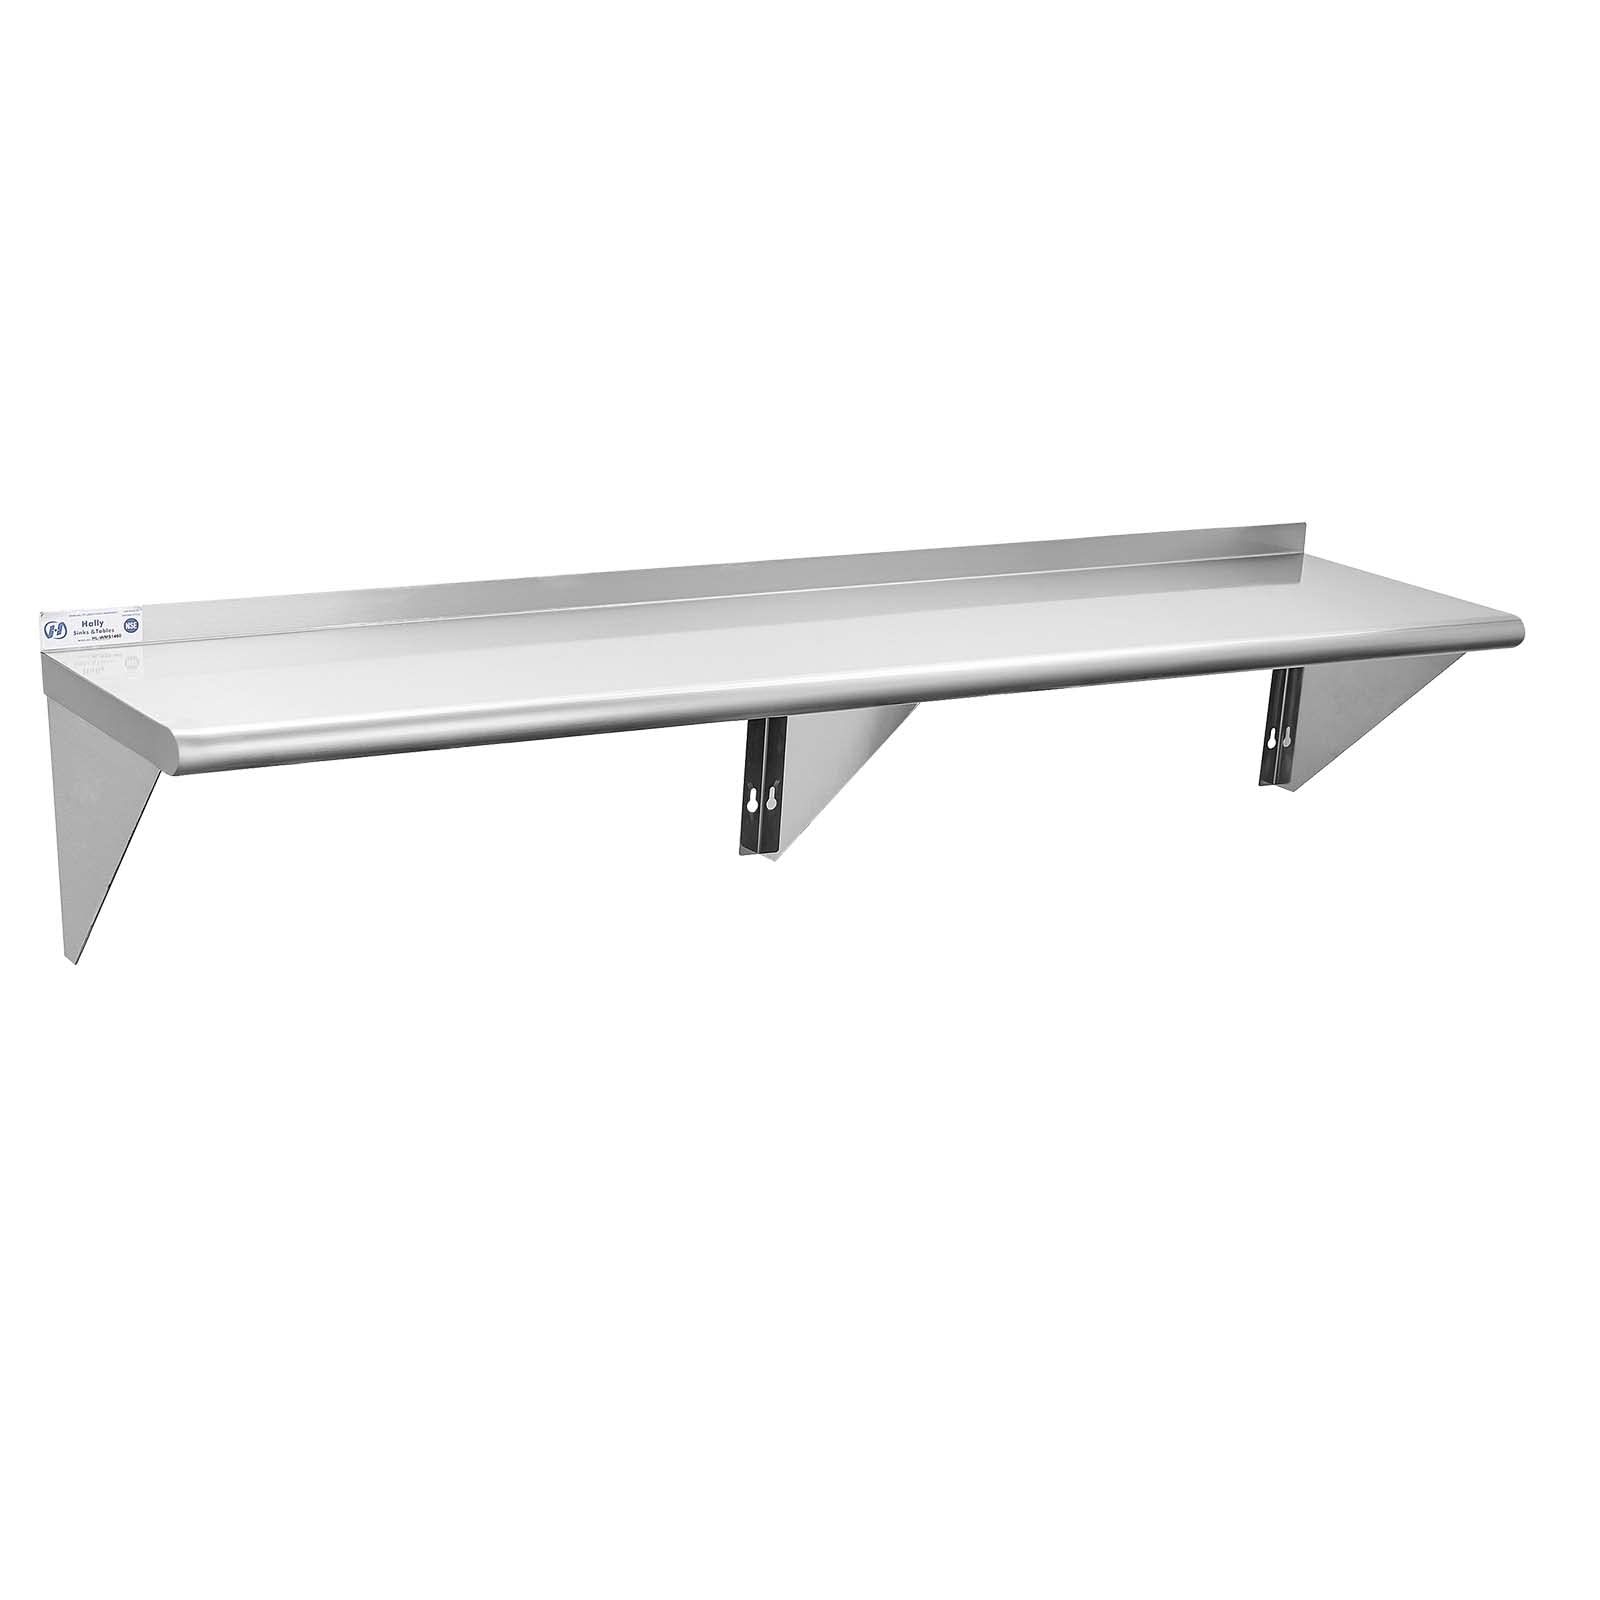 HALLY SINKS & TABLES H Stainless Steel Shelf